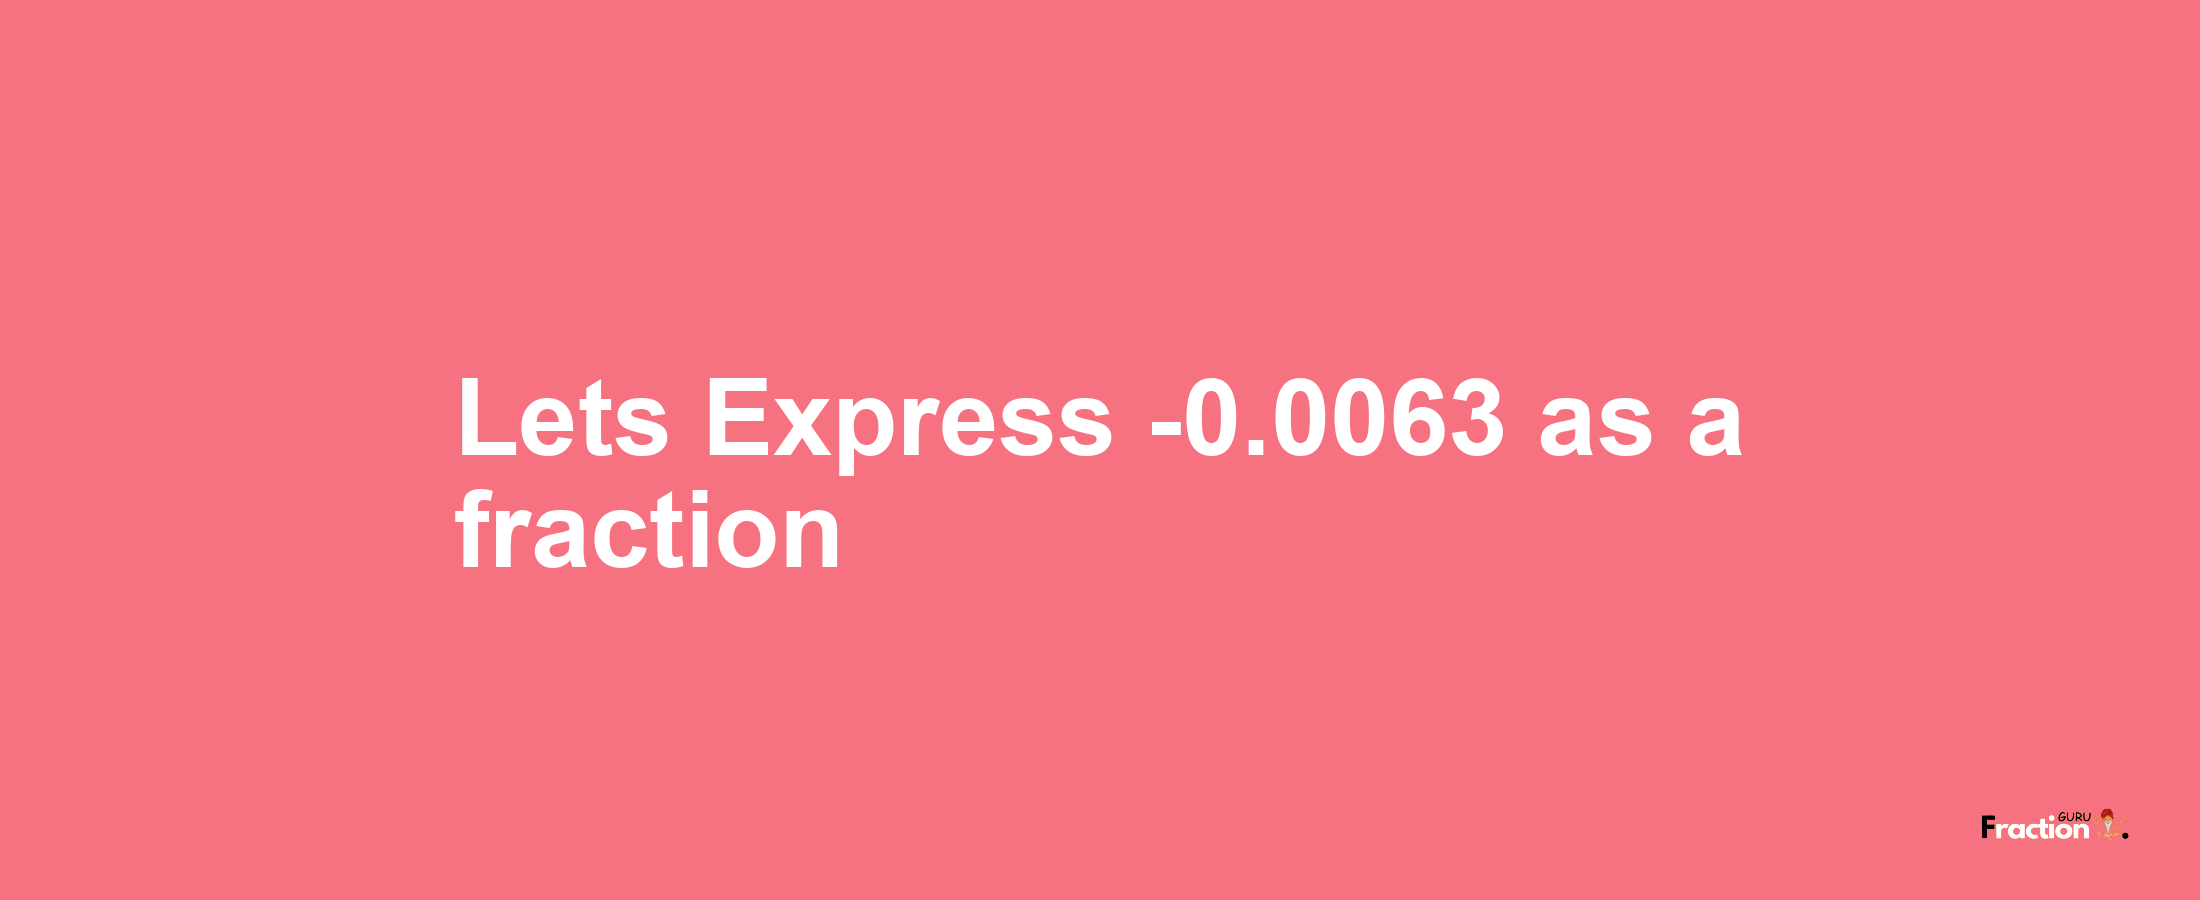 Lets Express -0.0063 as afraction